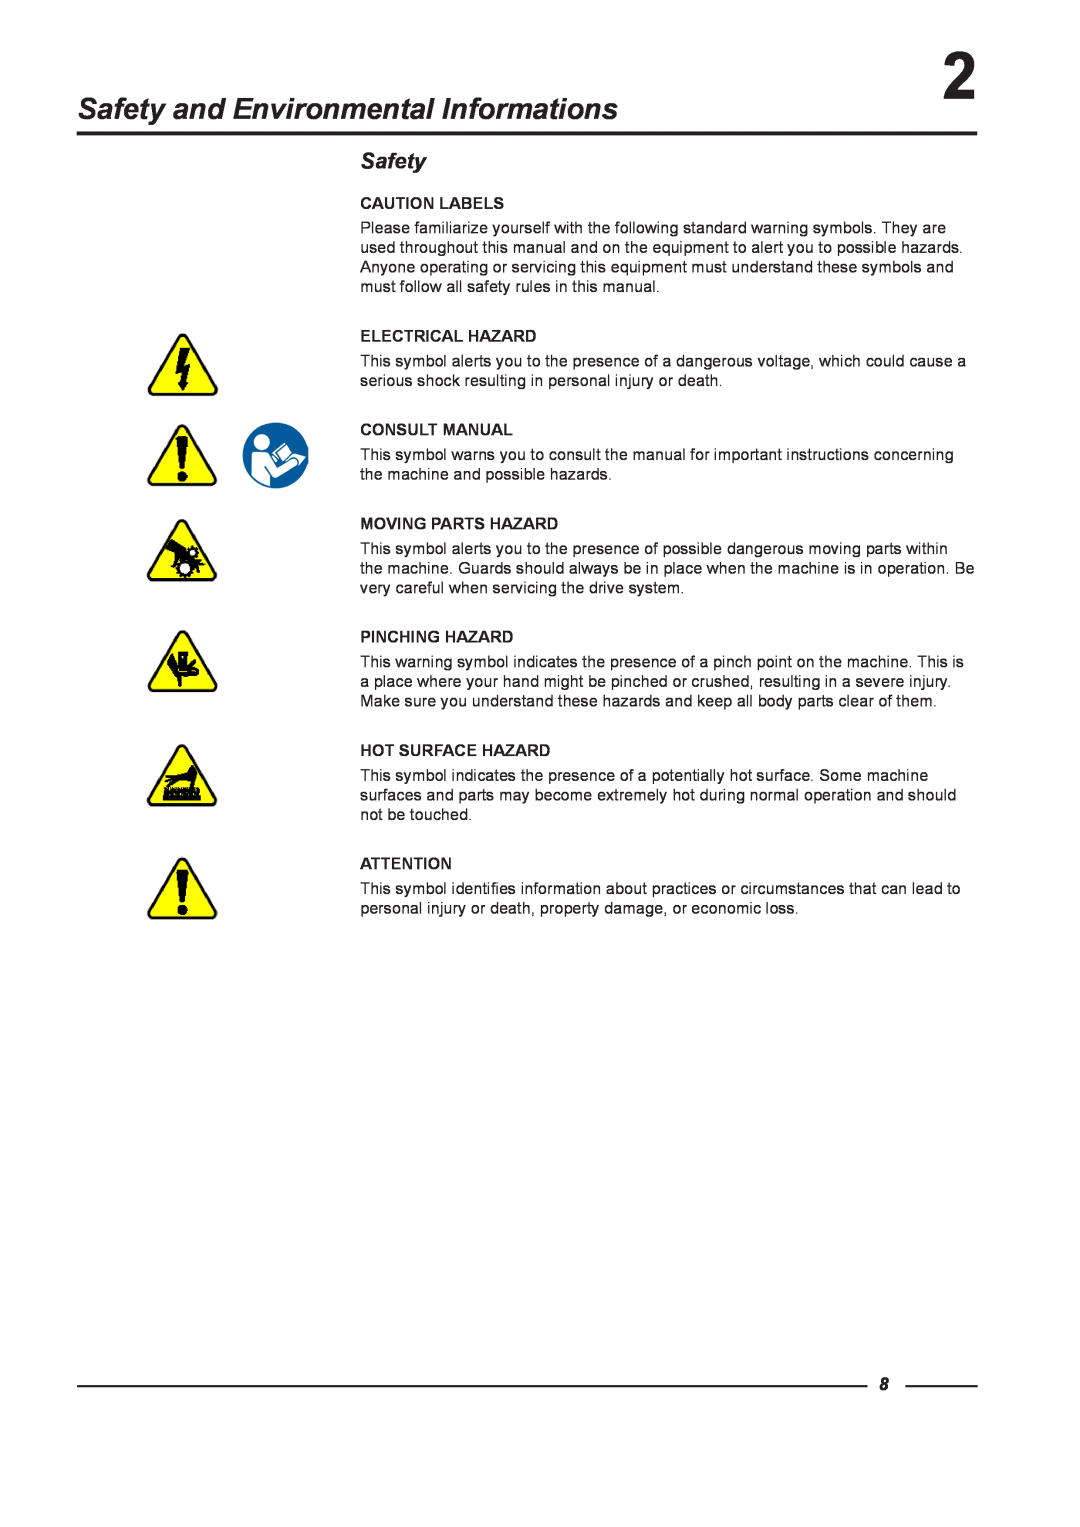 Alliance Laundry Systems WFF65 Safety and Environmental Informations, Caution Labels, Electrical Hazard, Consult Manual 